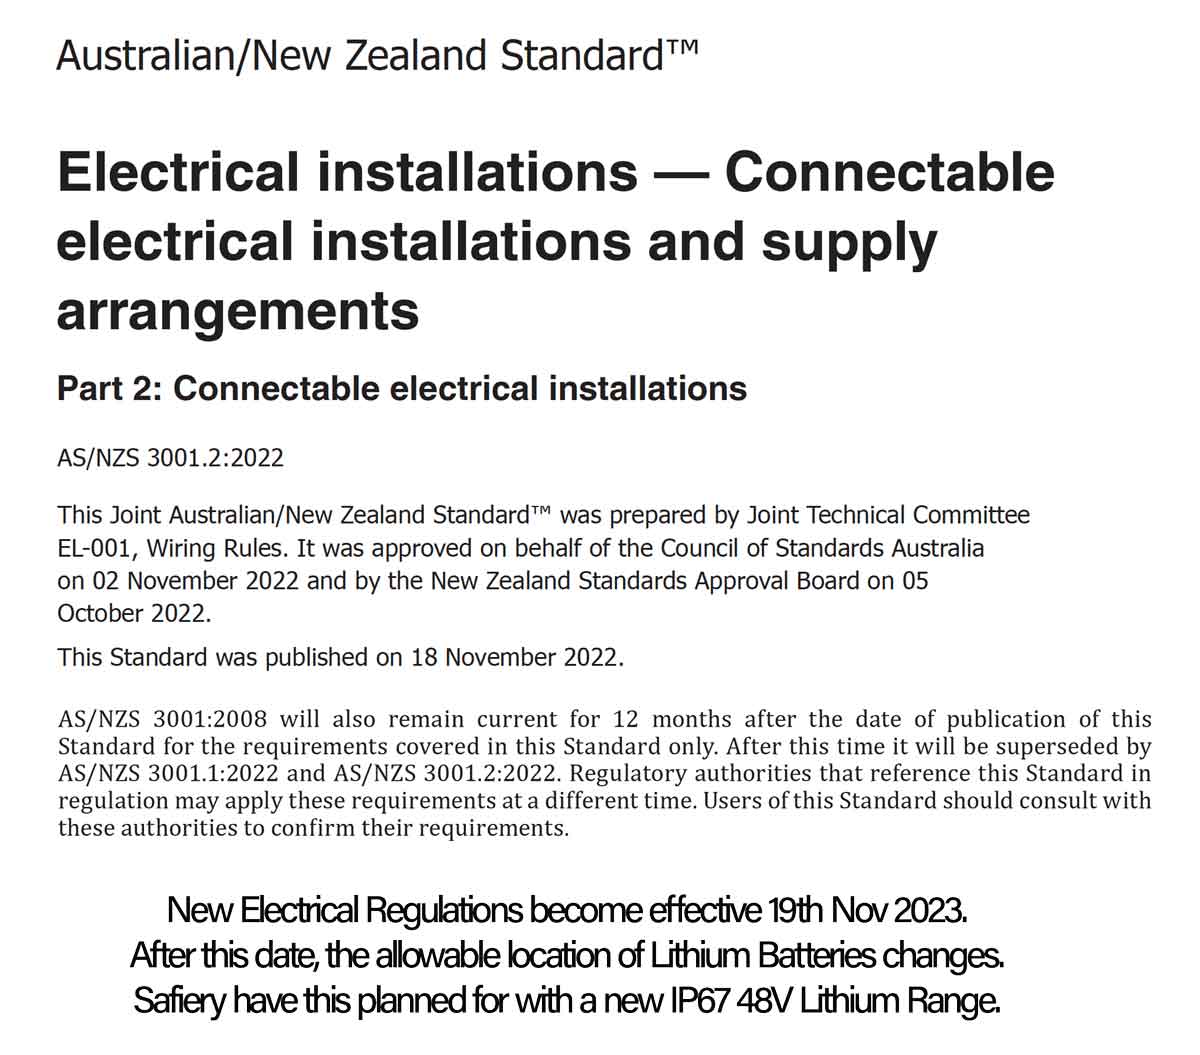 New Electrical Standard Apply Soon and impact Lithium Batteries